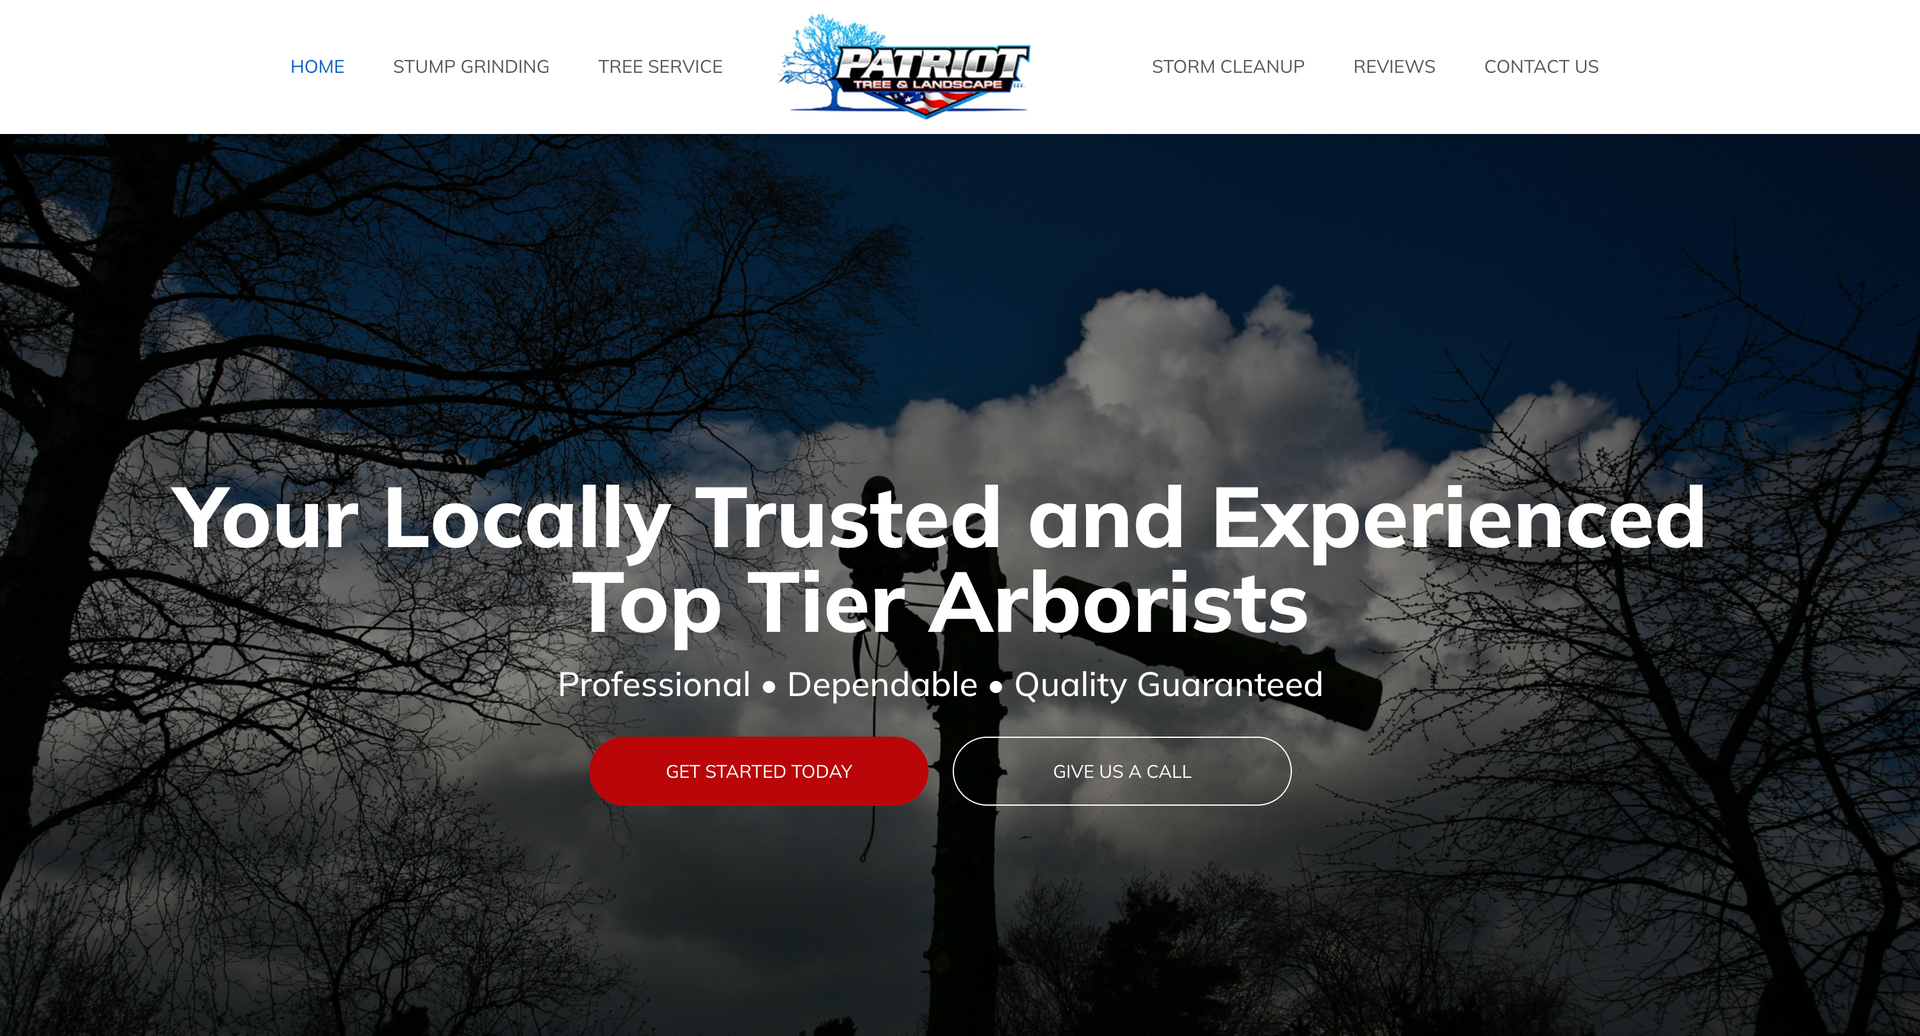 A screenshot of a website that says `` your locally trusted and experienced top tier arborists ''.